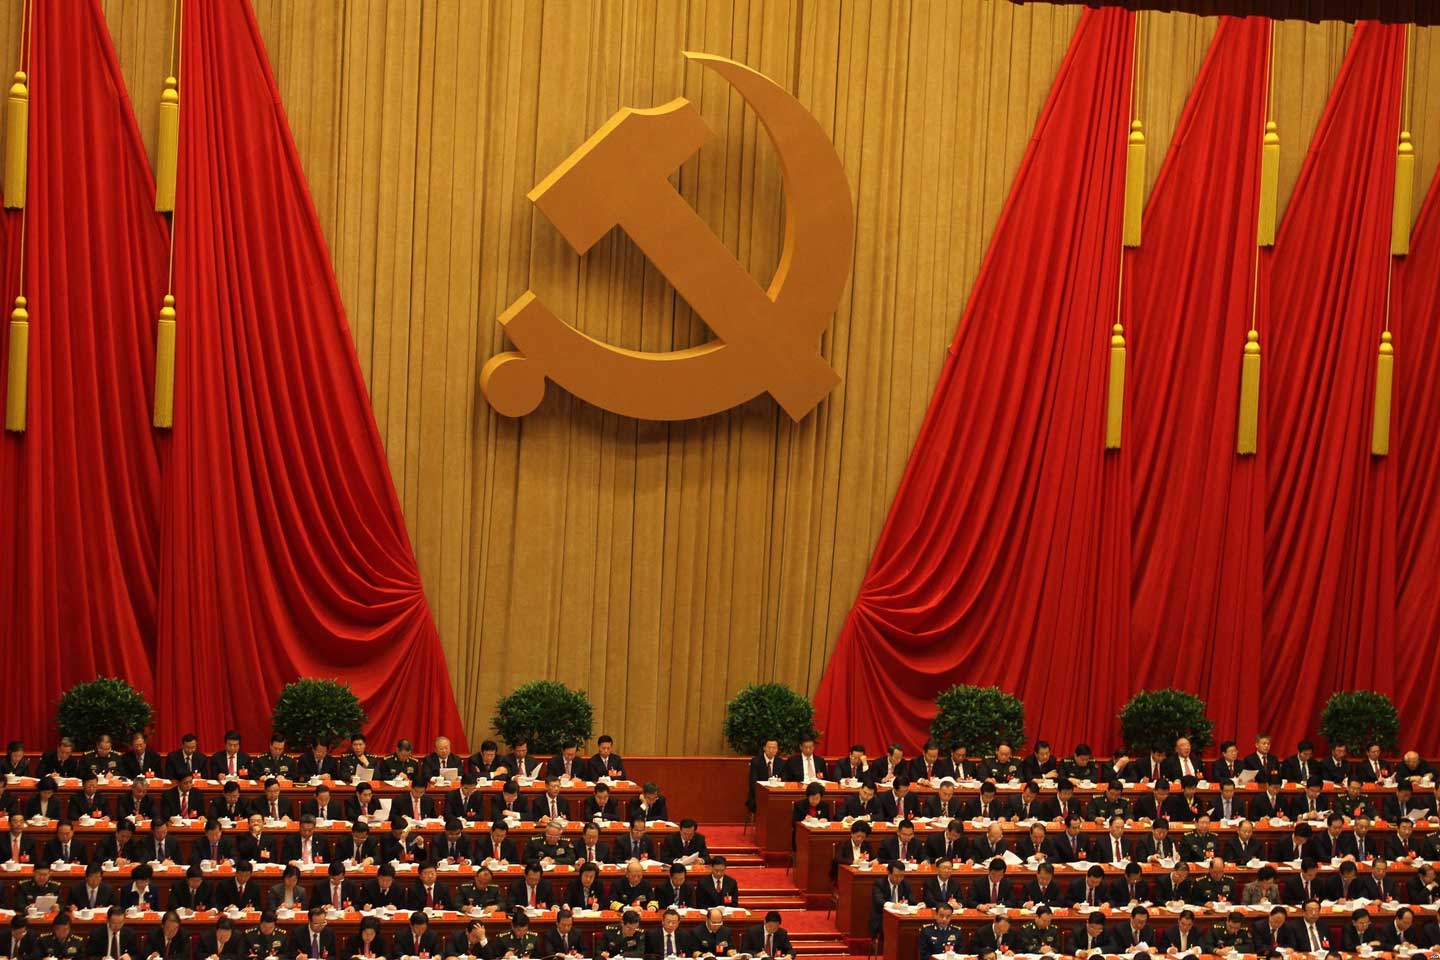 A session of the National People’s Congress of China